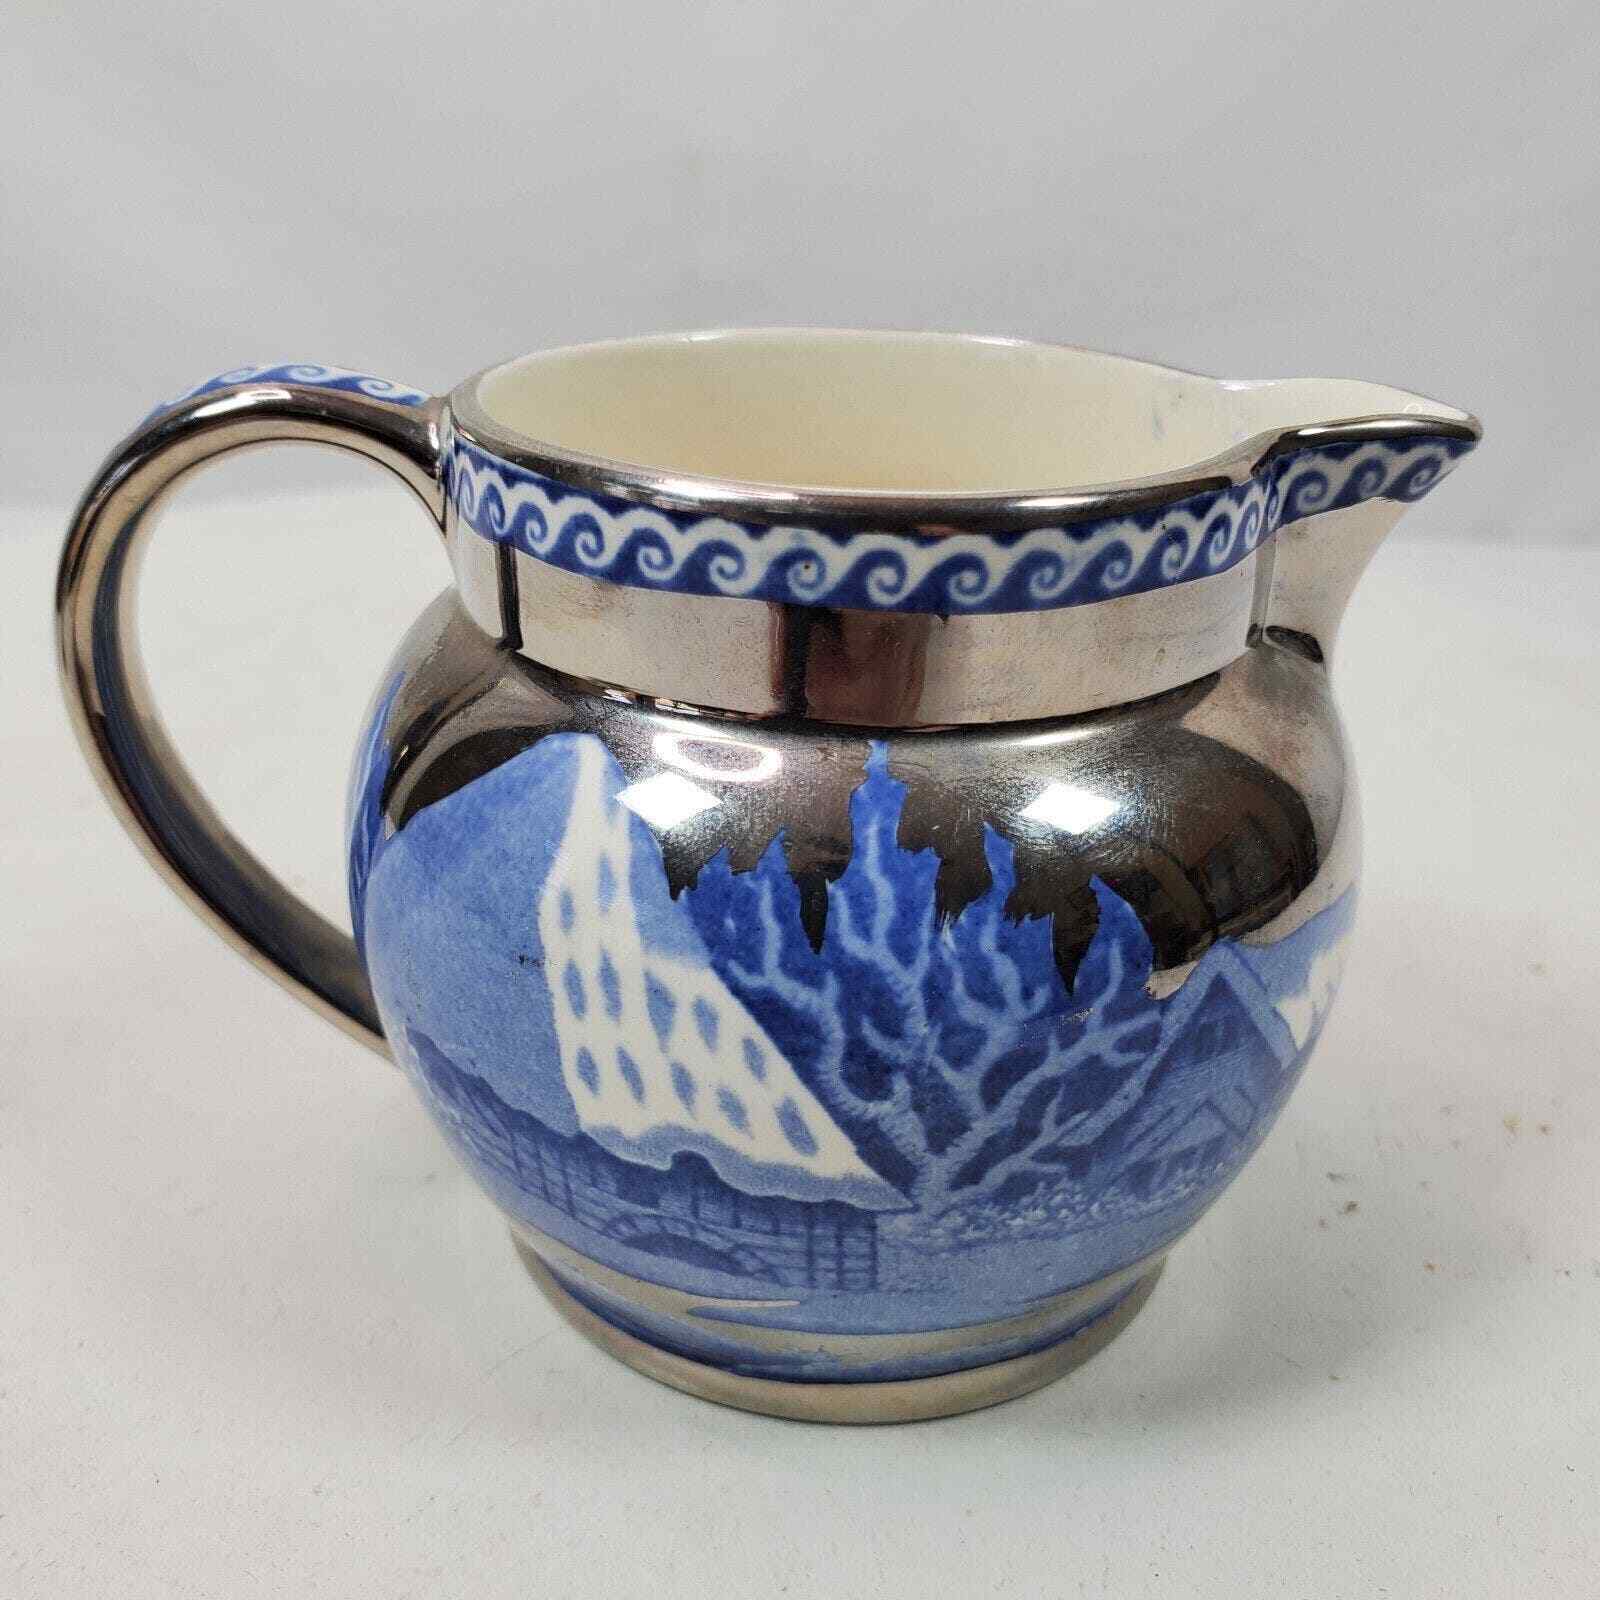 Vintage Wedgwood Fallow Deer Ceramic Pitcher 2.75 Inch Tall Blue Silver